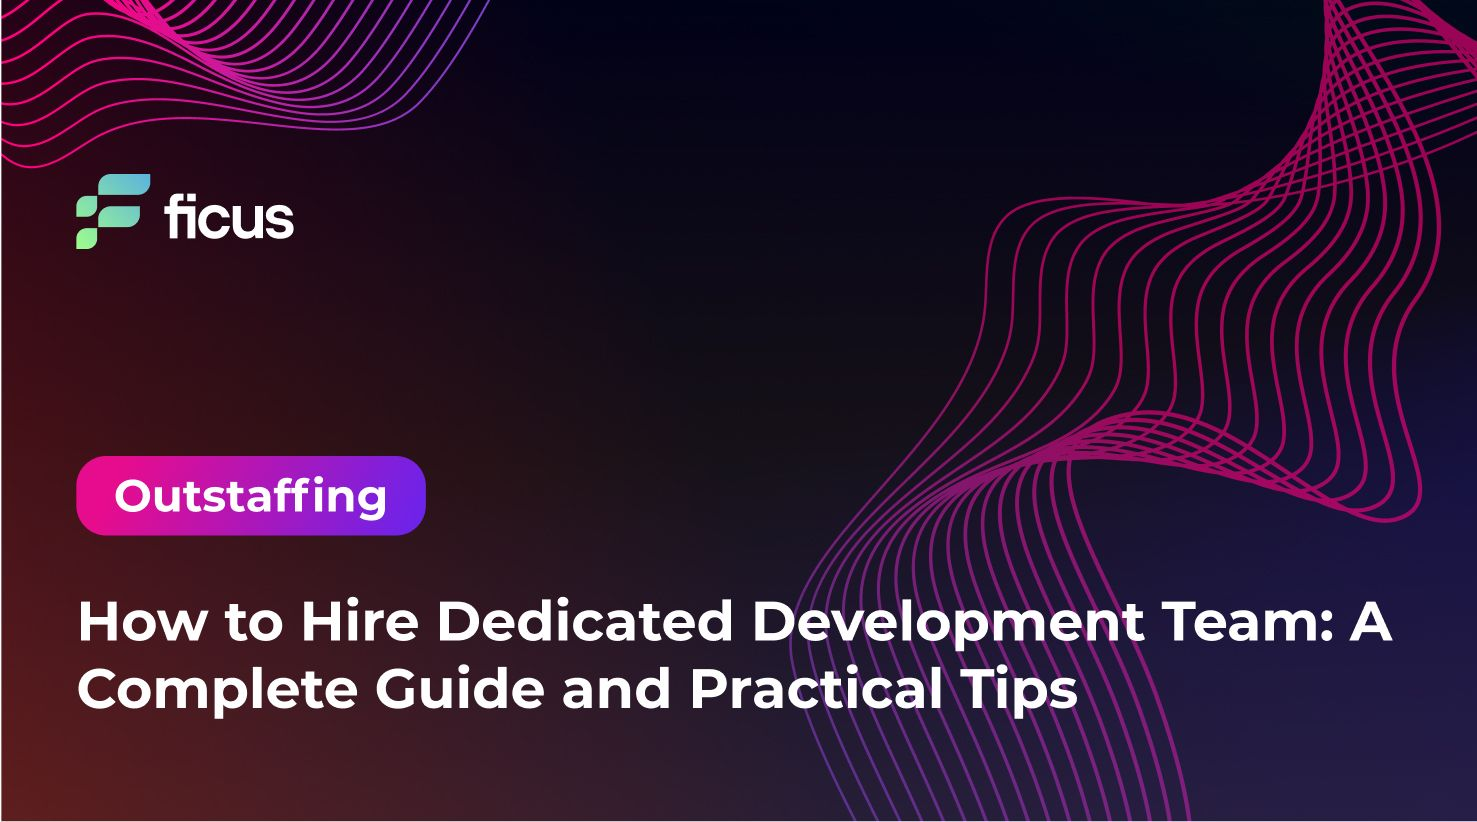 How to Hire Dedicated Development Team: A Complete Guide and Practical Tips